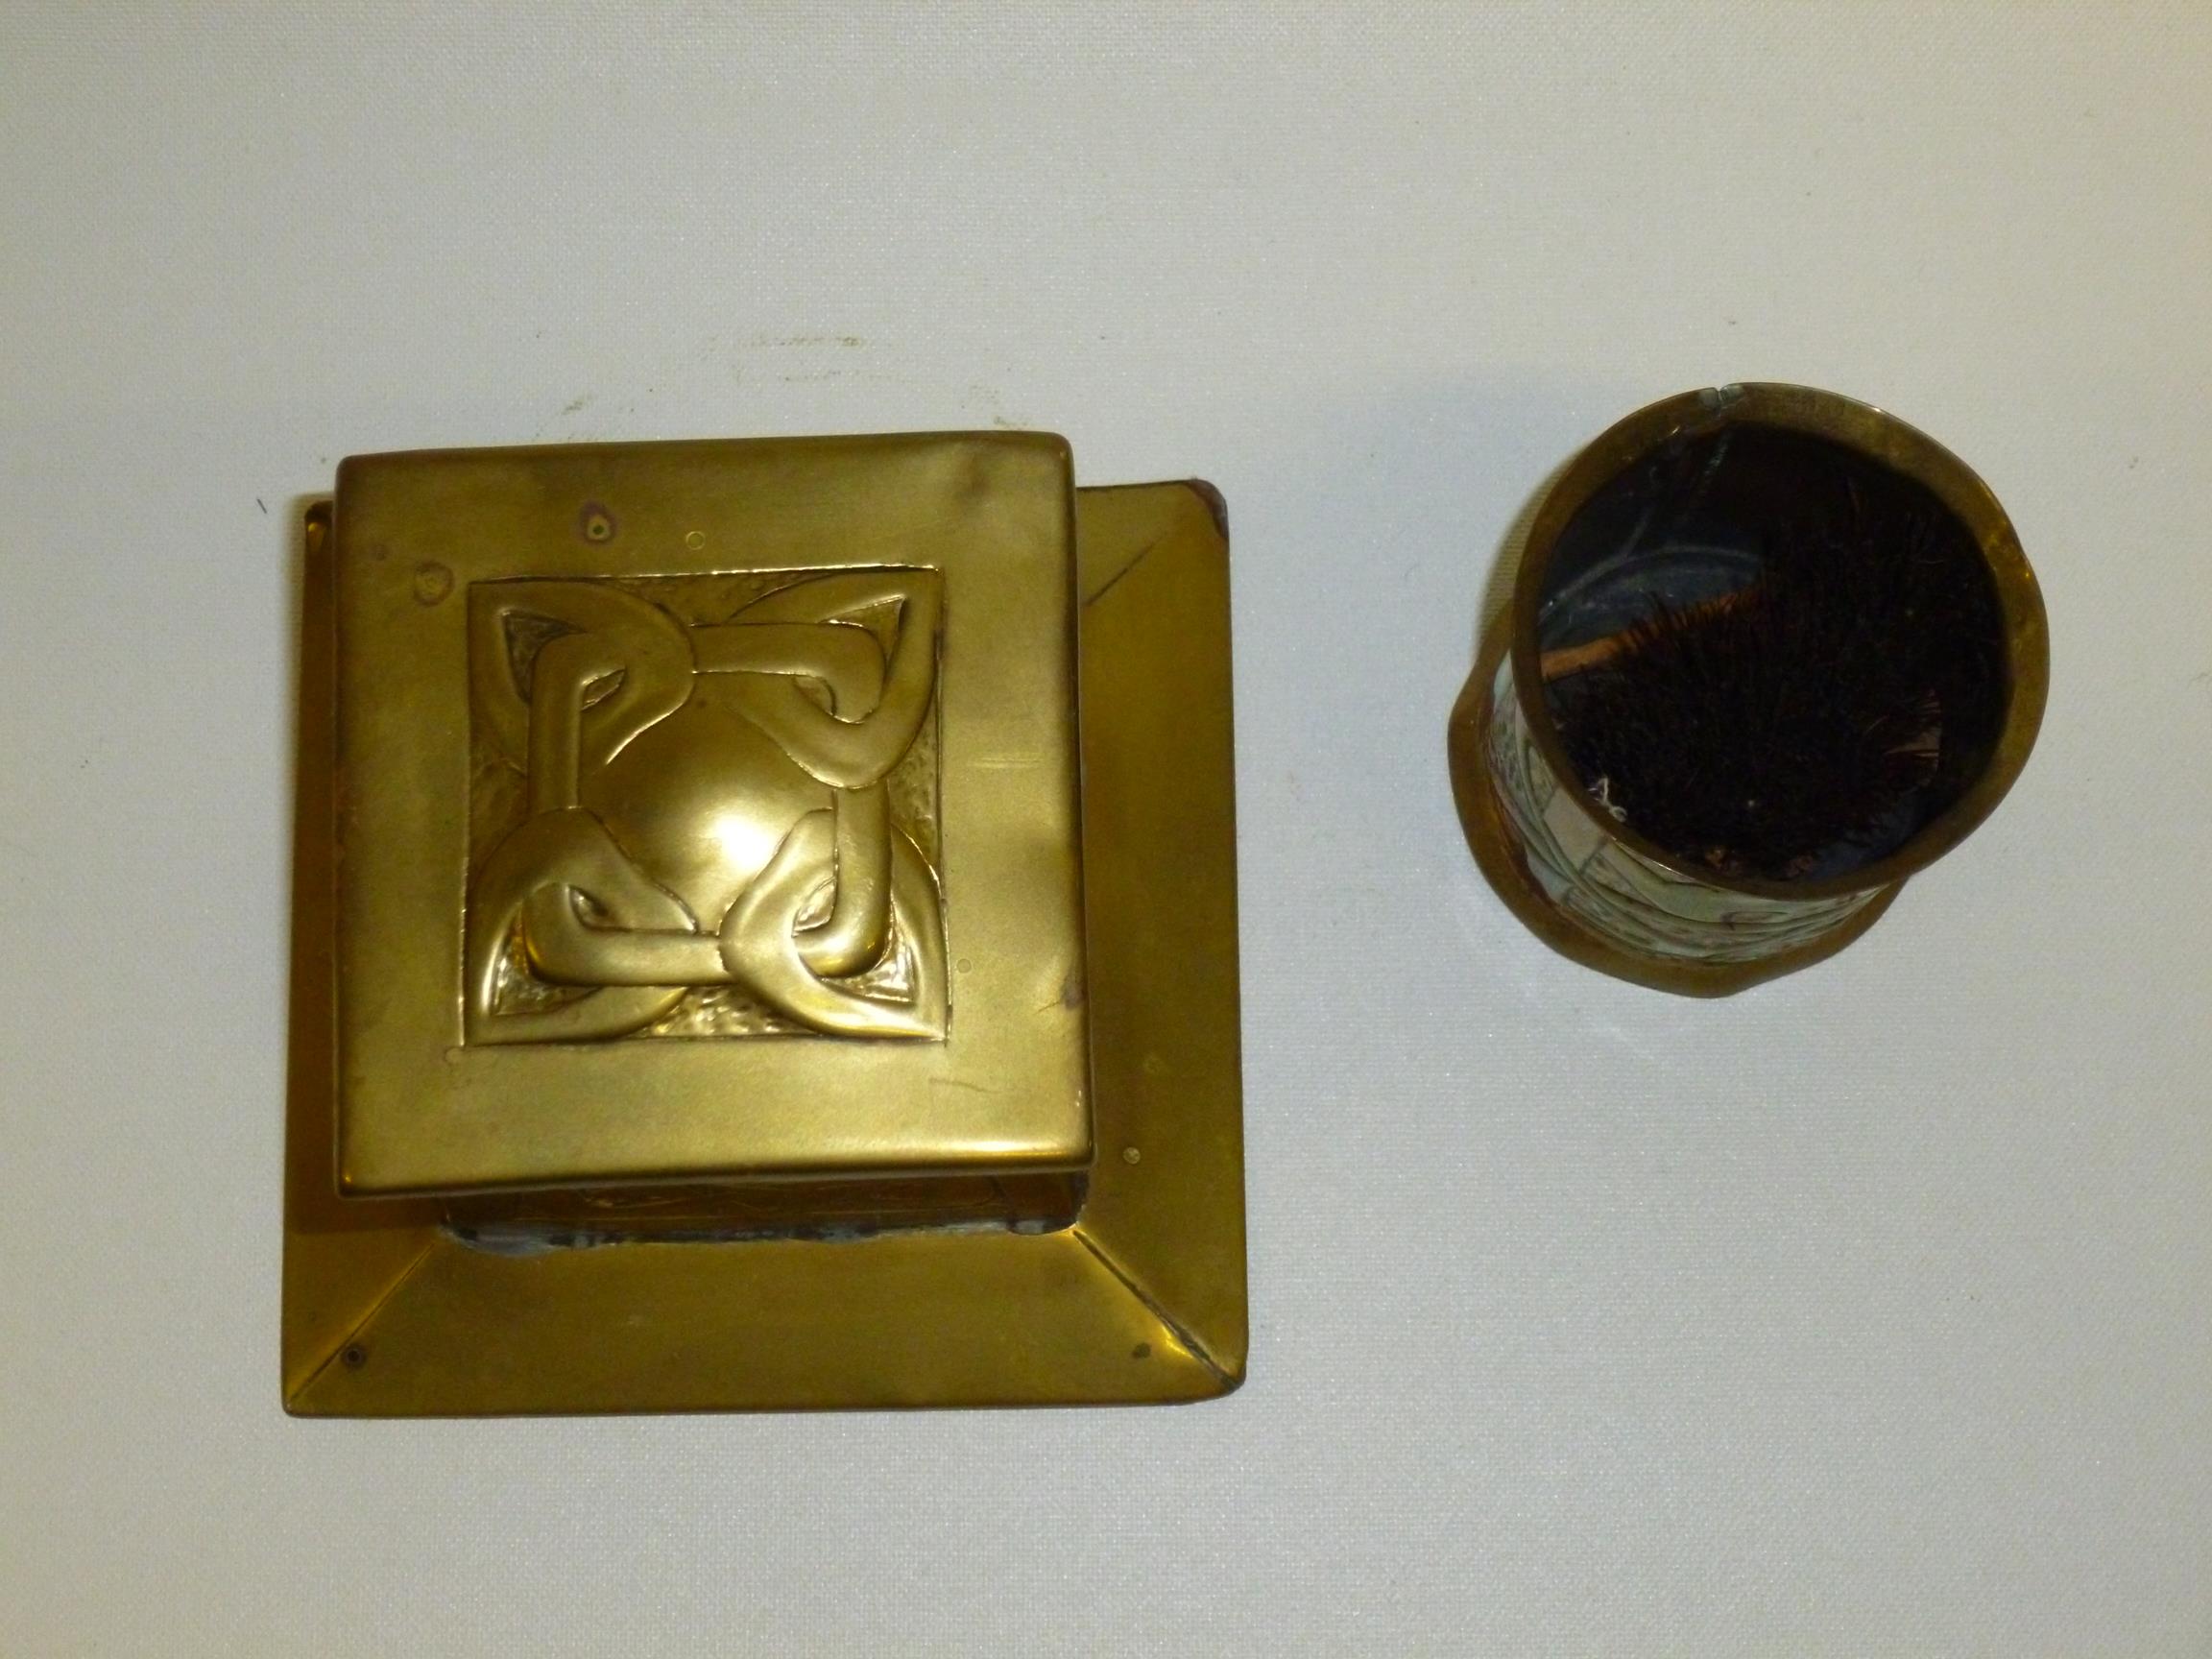 ART NOUVEAU STYLE BRASS INKWELL AND CYLINDRICAL NIB WIPER WITH CELTIC MOTIF DESIGN - Image 2 of 4